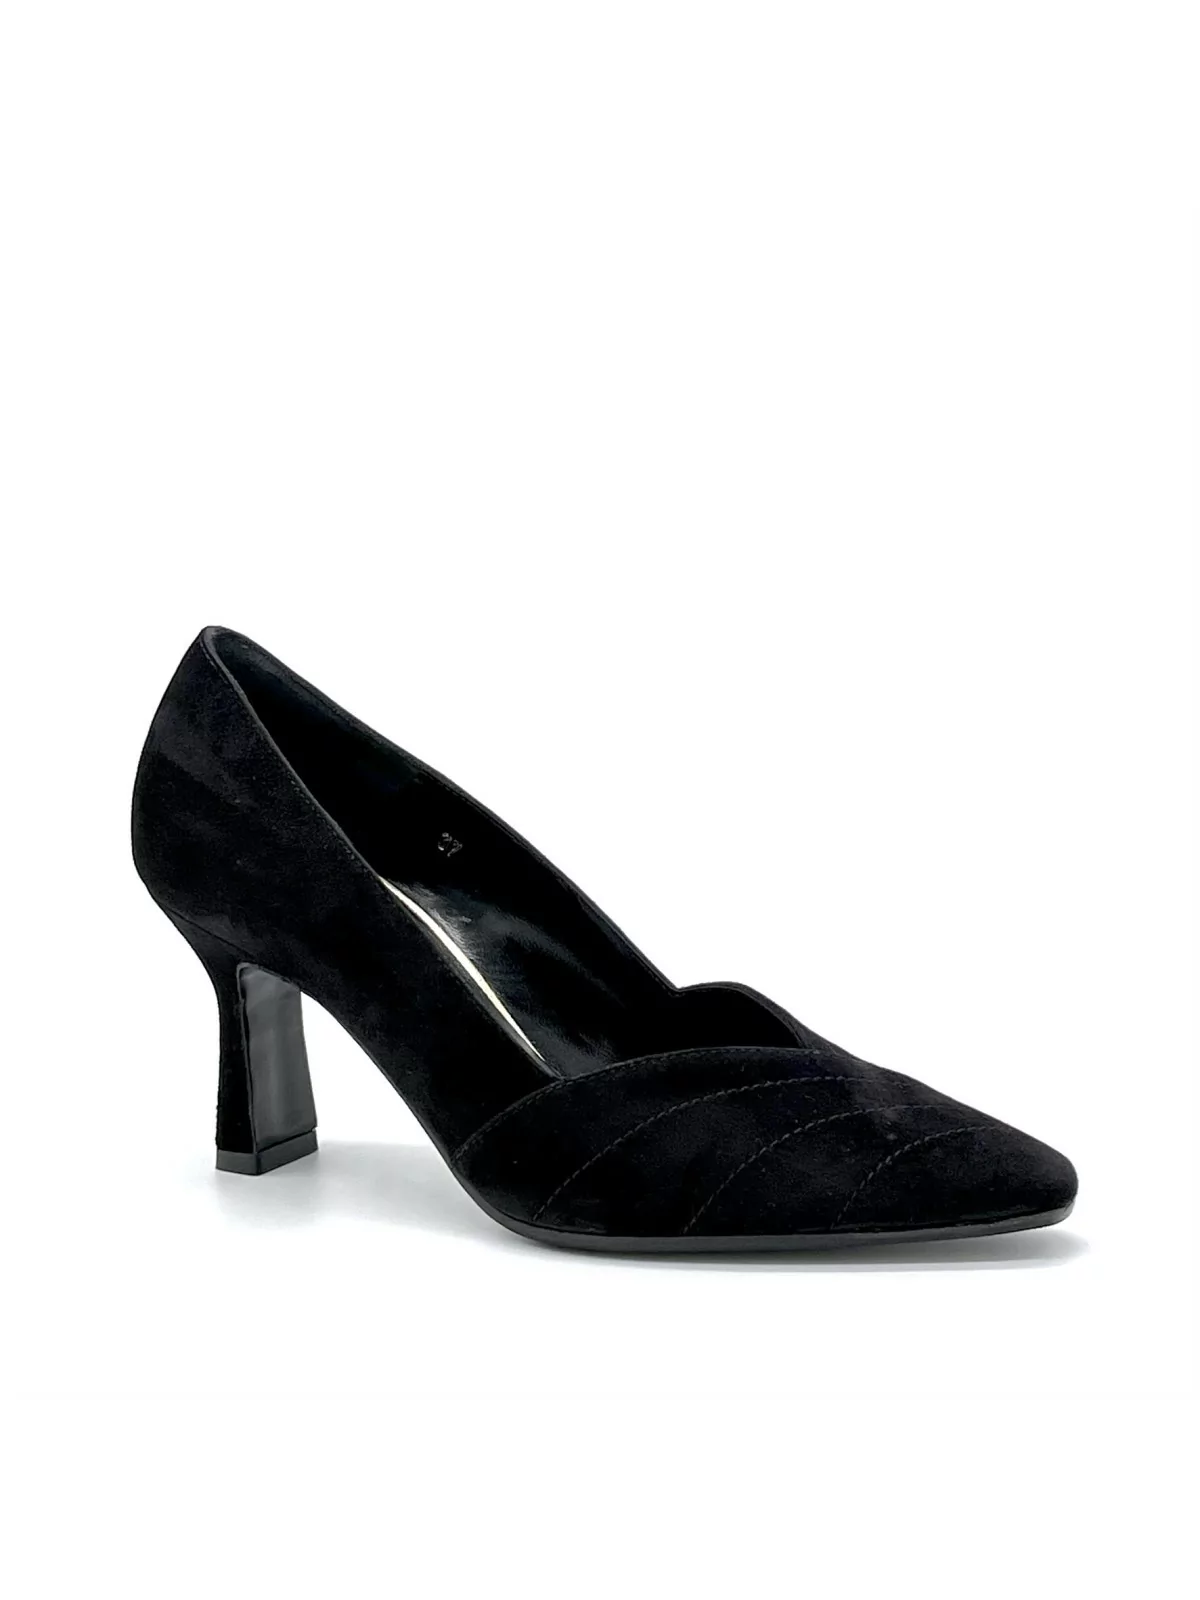 Black suede pump. Leather lining, leather and rubber sole. 7,5 cm heel.